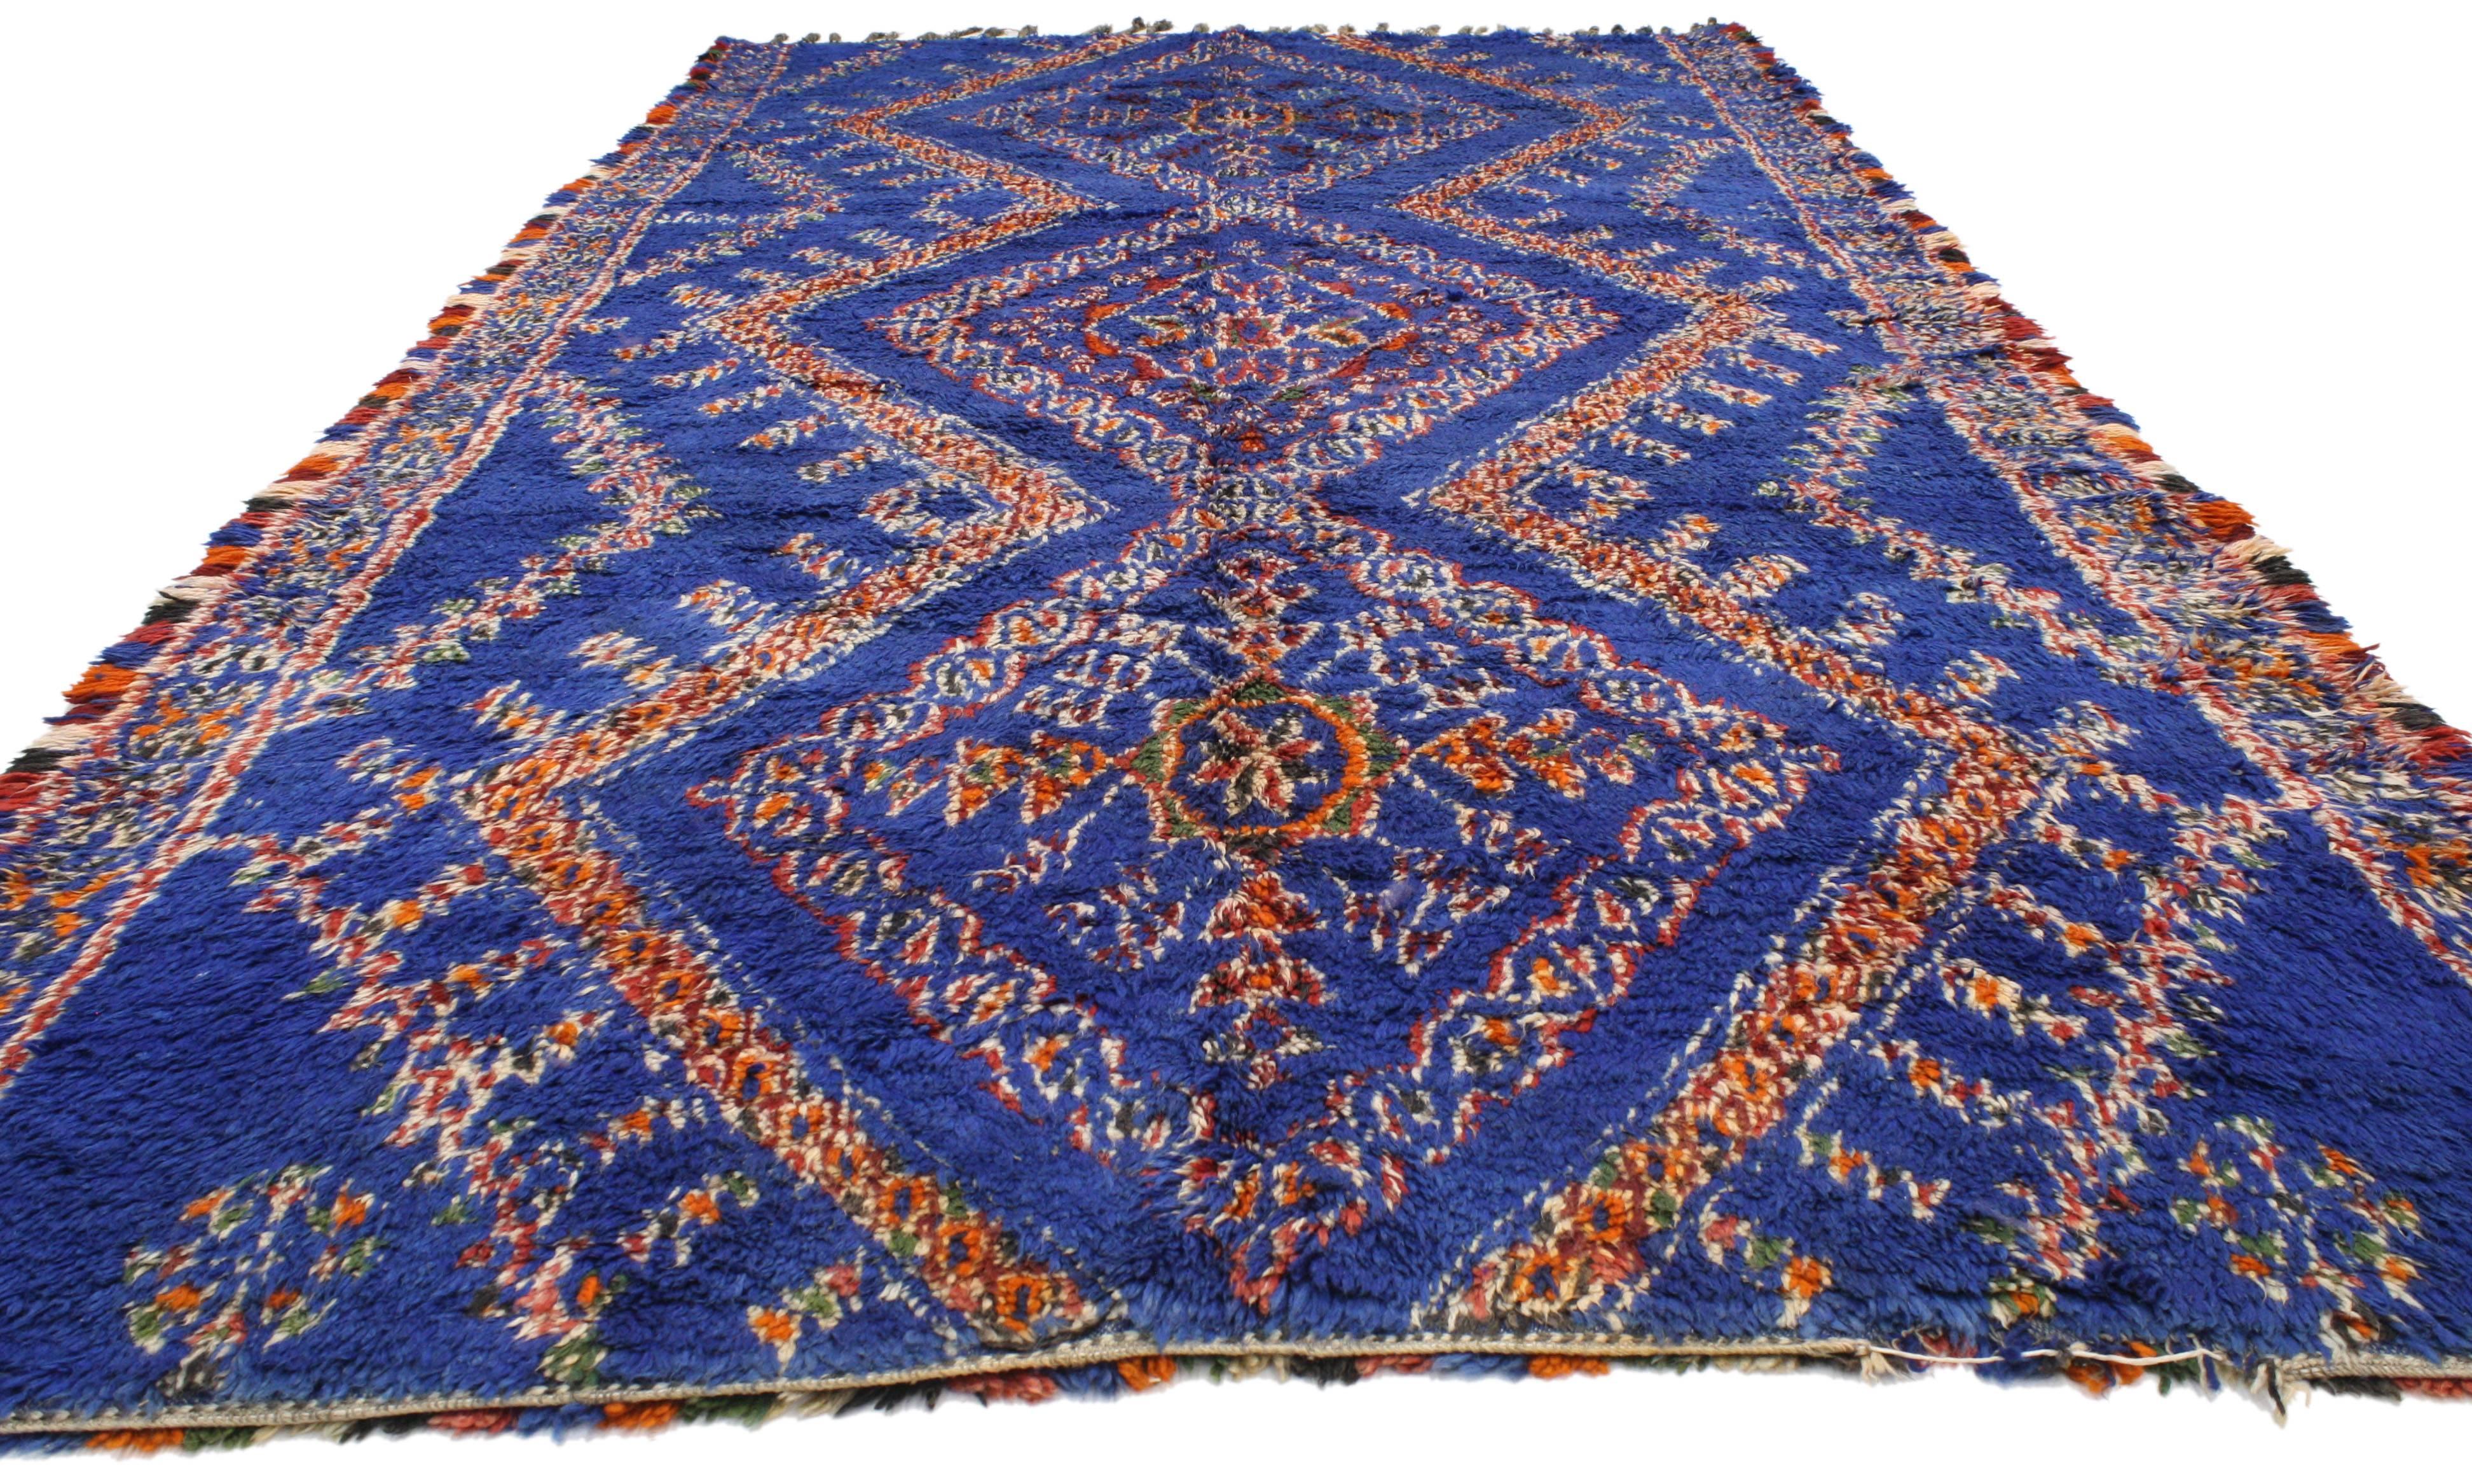 20642, blue Beni Ourain Moroccan rug with Mid-Century Modern style. Transform your space into a Moroccan paradise! Extraordinarily exceptional, this beautiful cobalt blue Moroccan rug not only adds depth, but it creates comfort and serves many